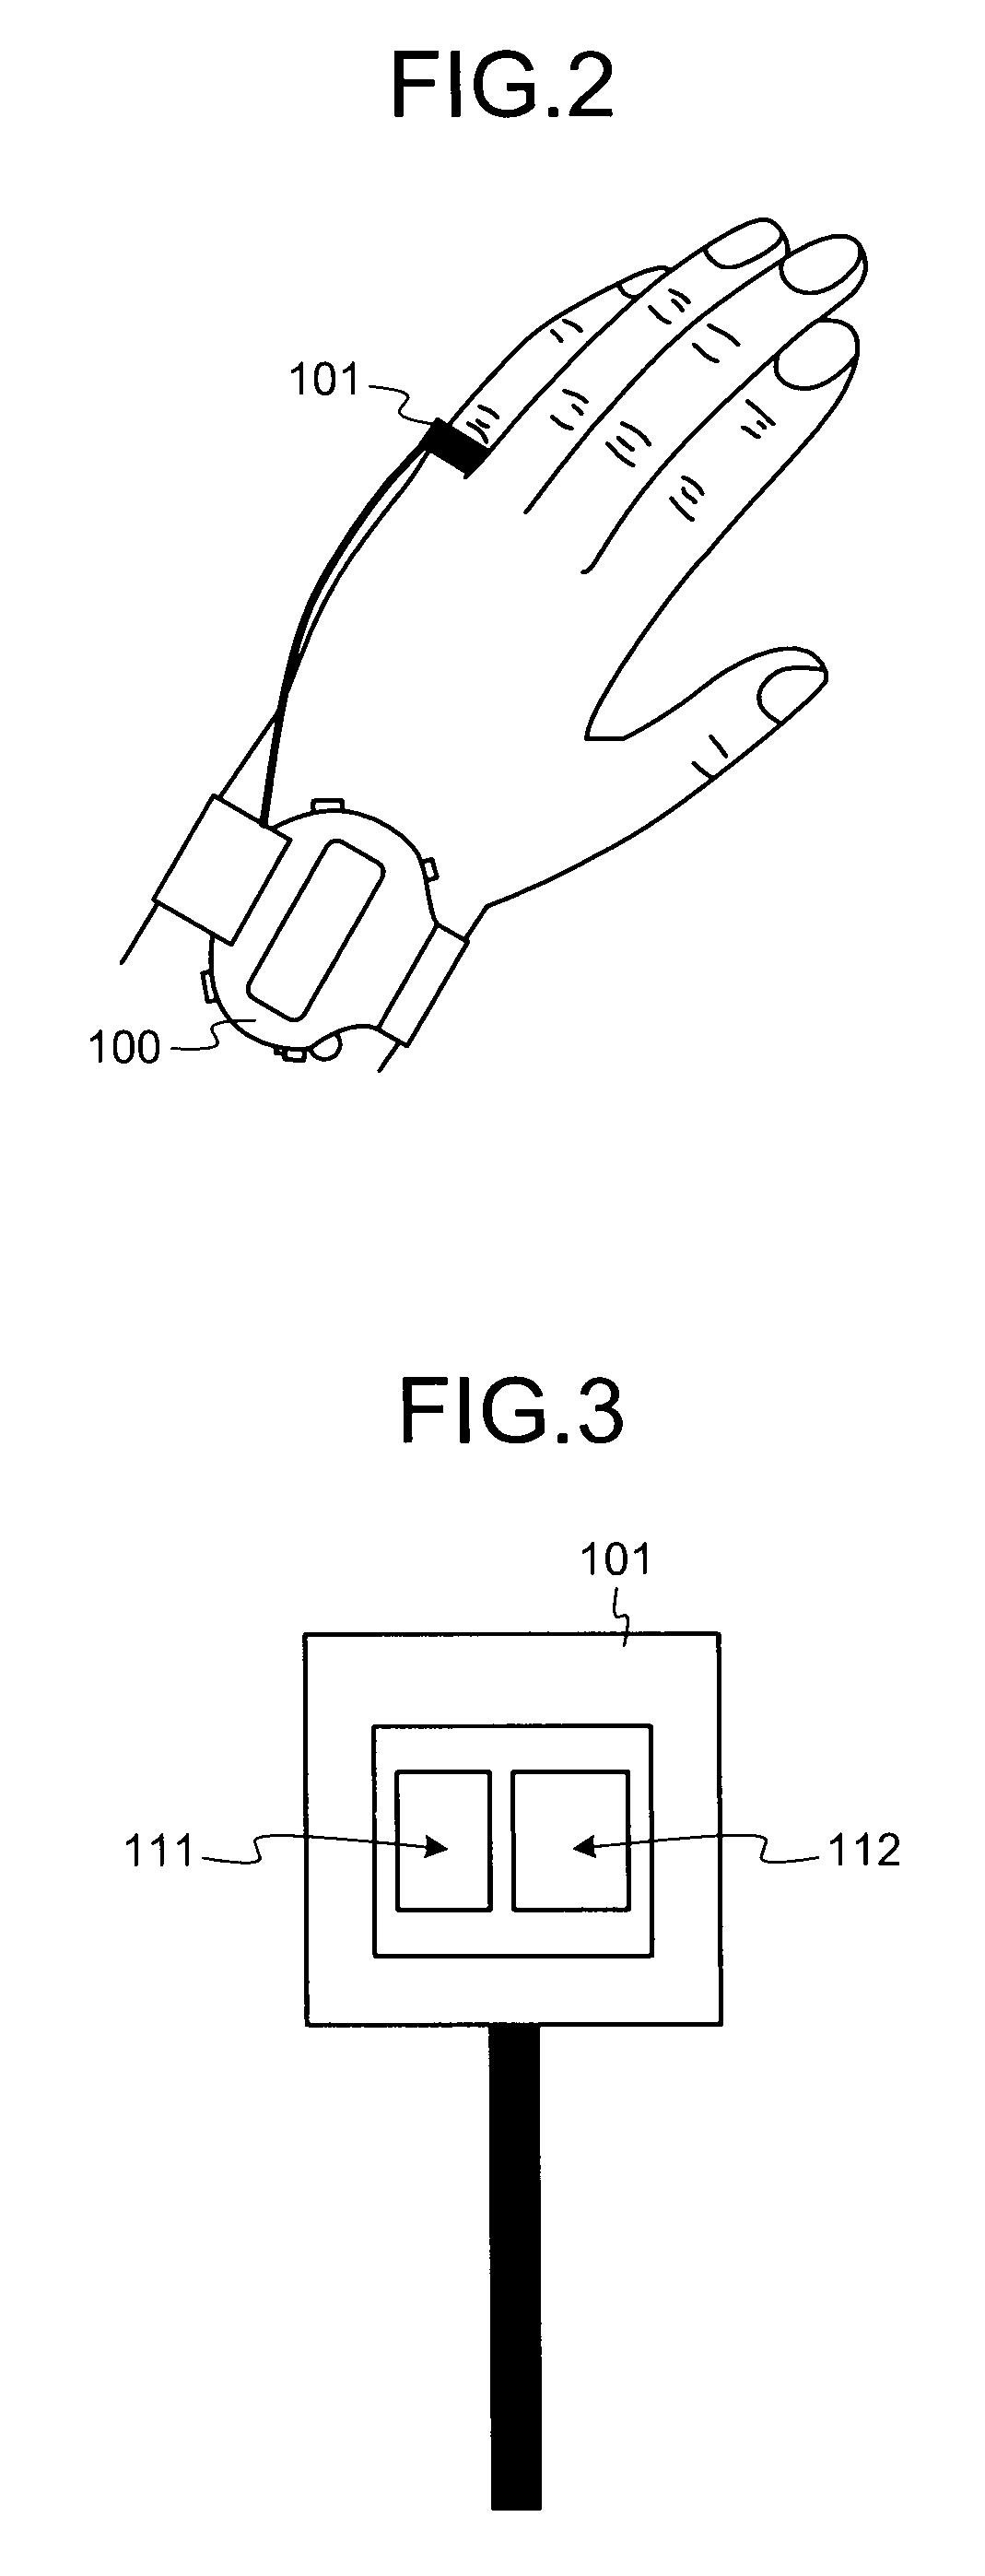 Apparatus and method for processing pulse waves